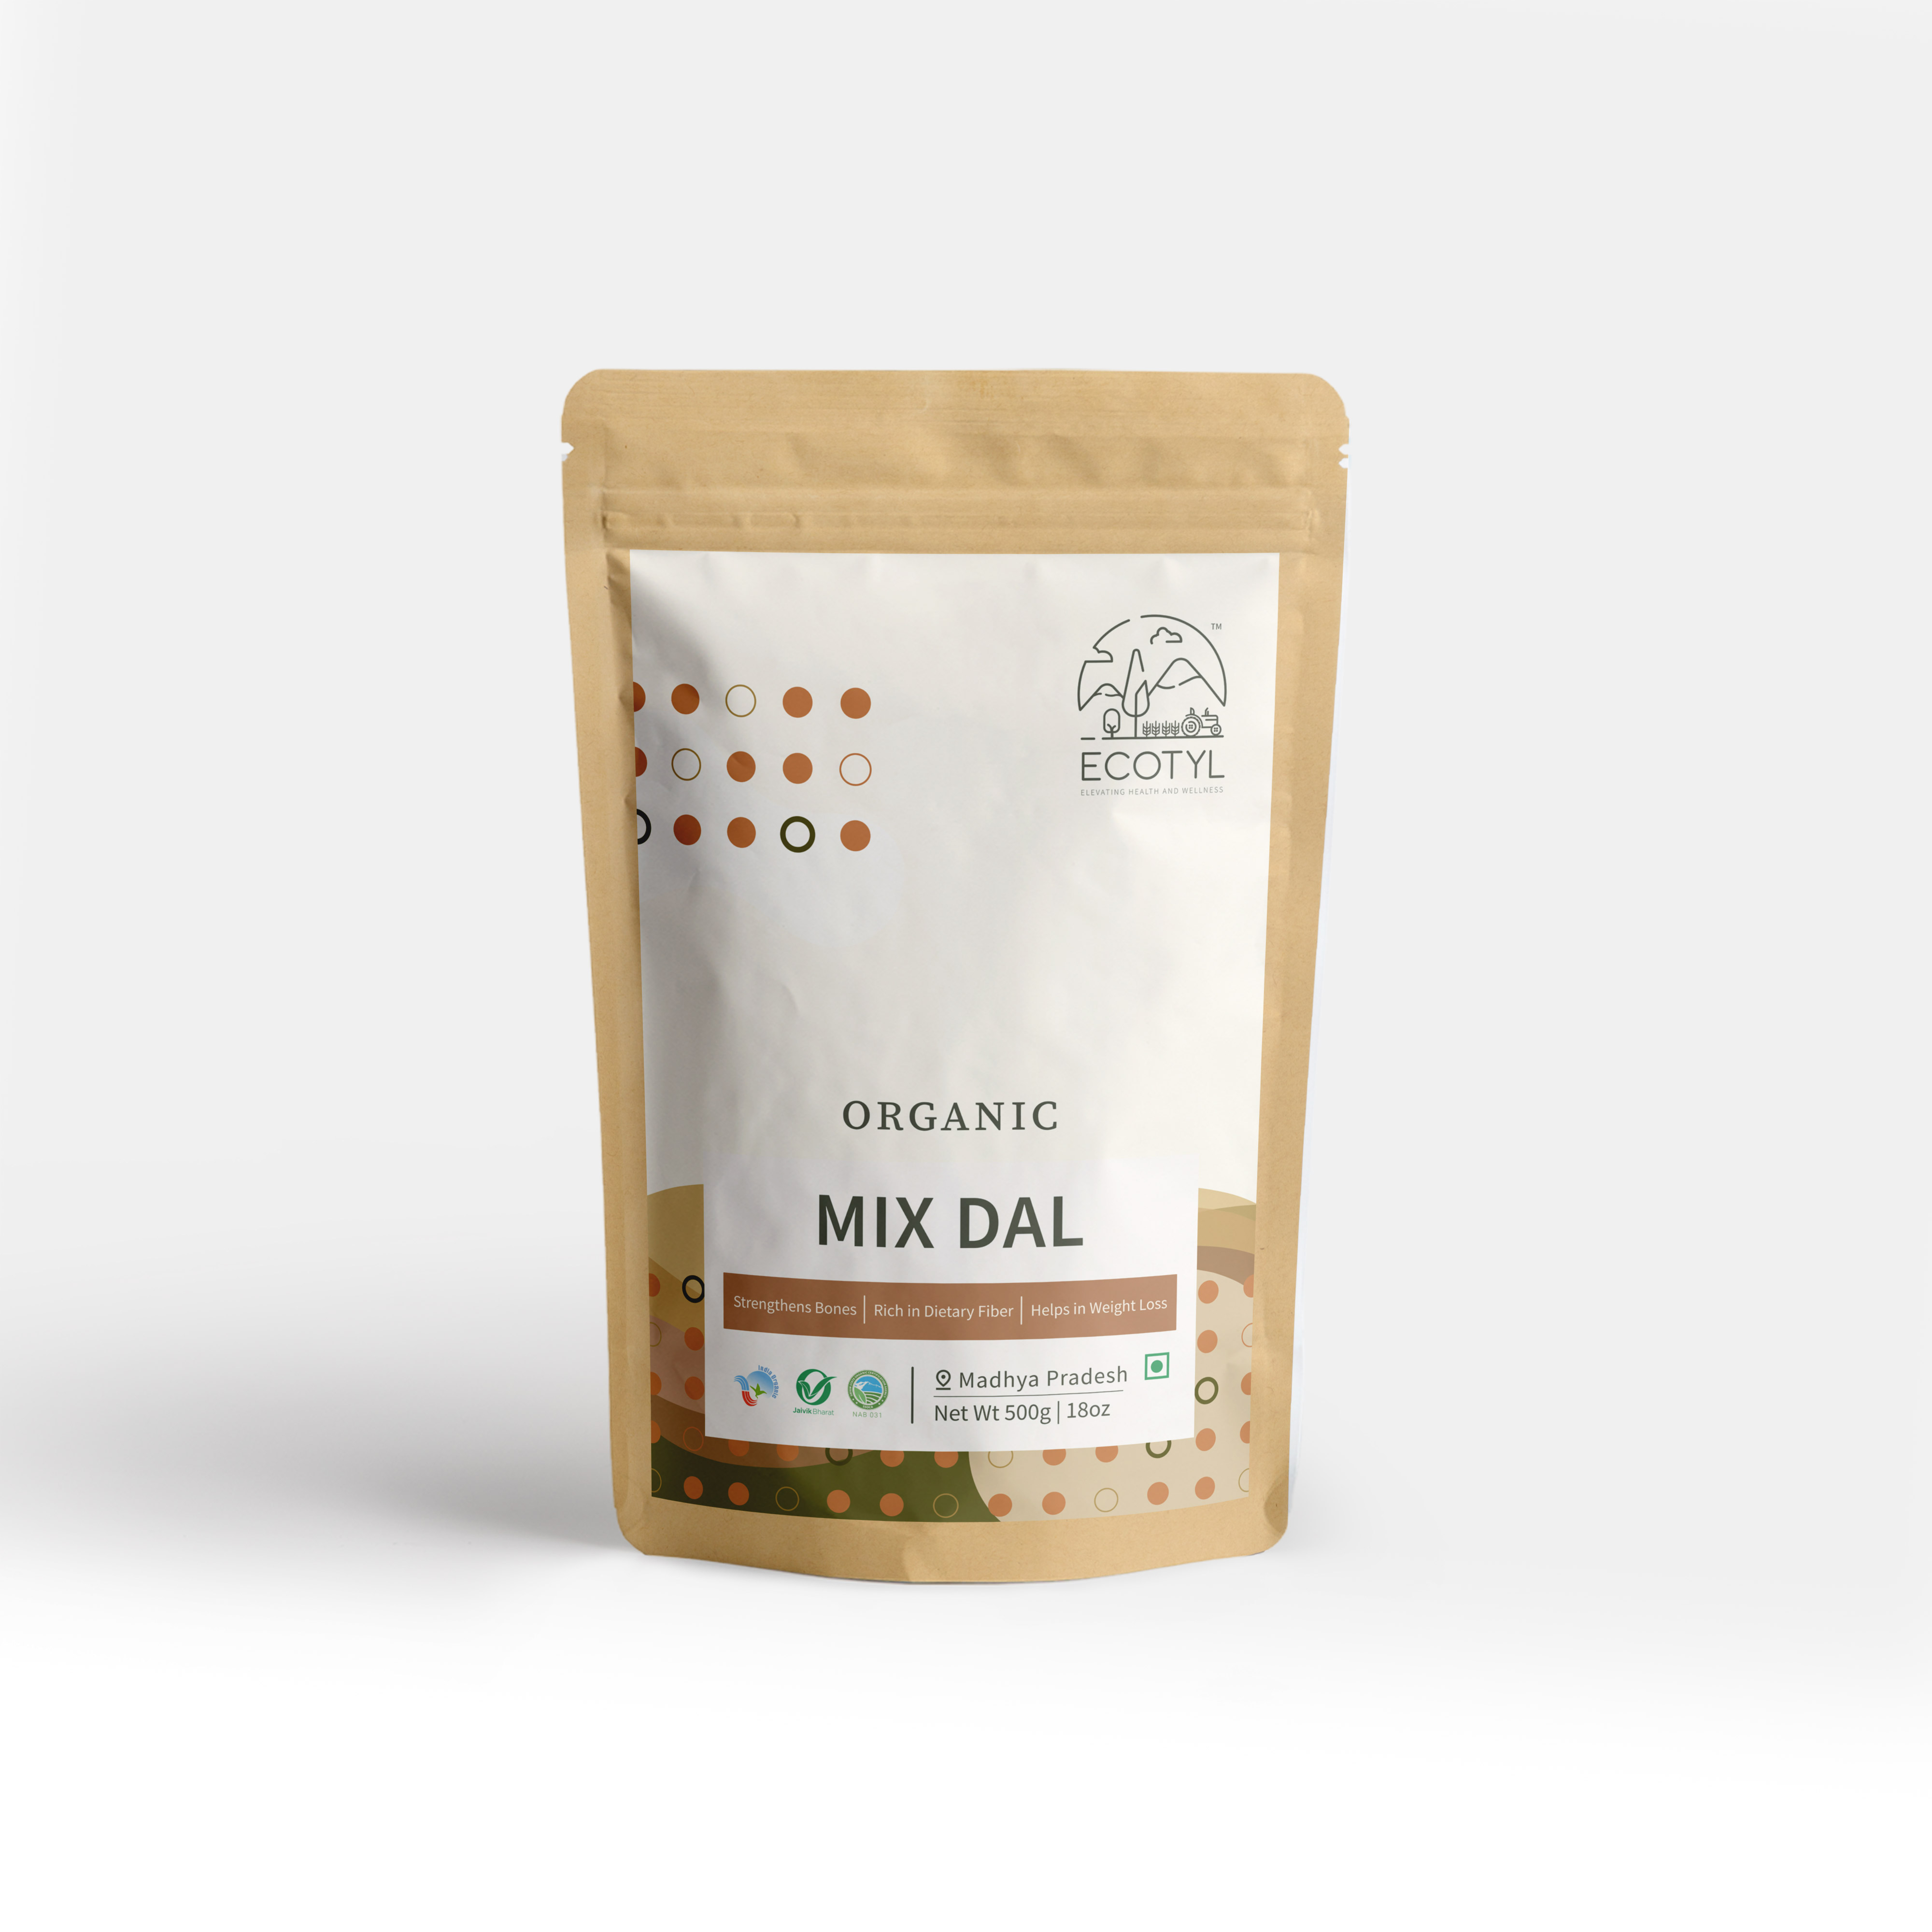 Buy Ecotyl Organic Mix Dal - 500 g at Best Price Online